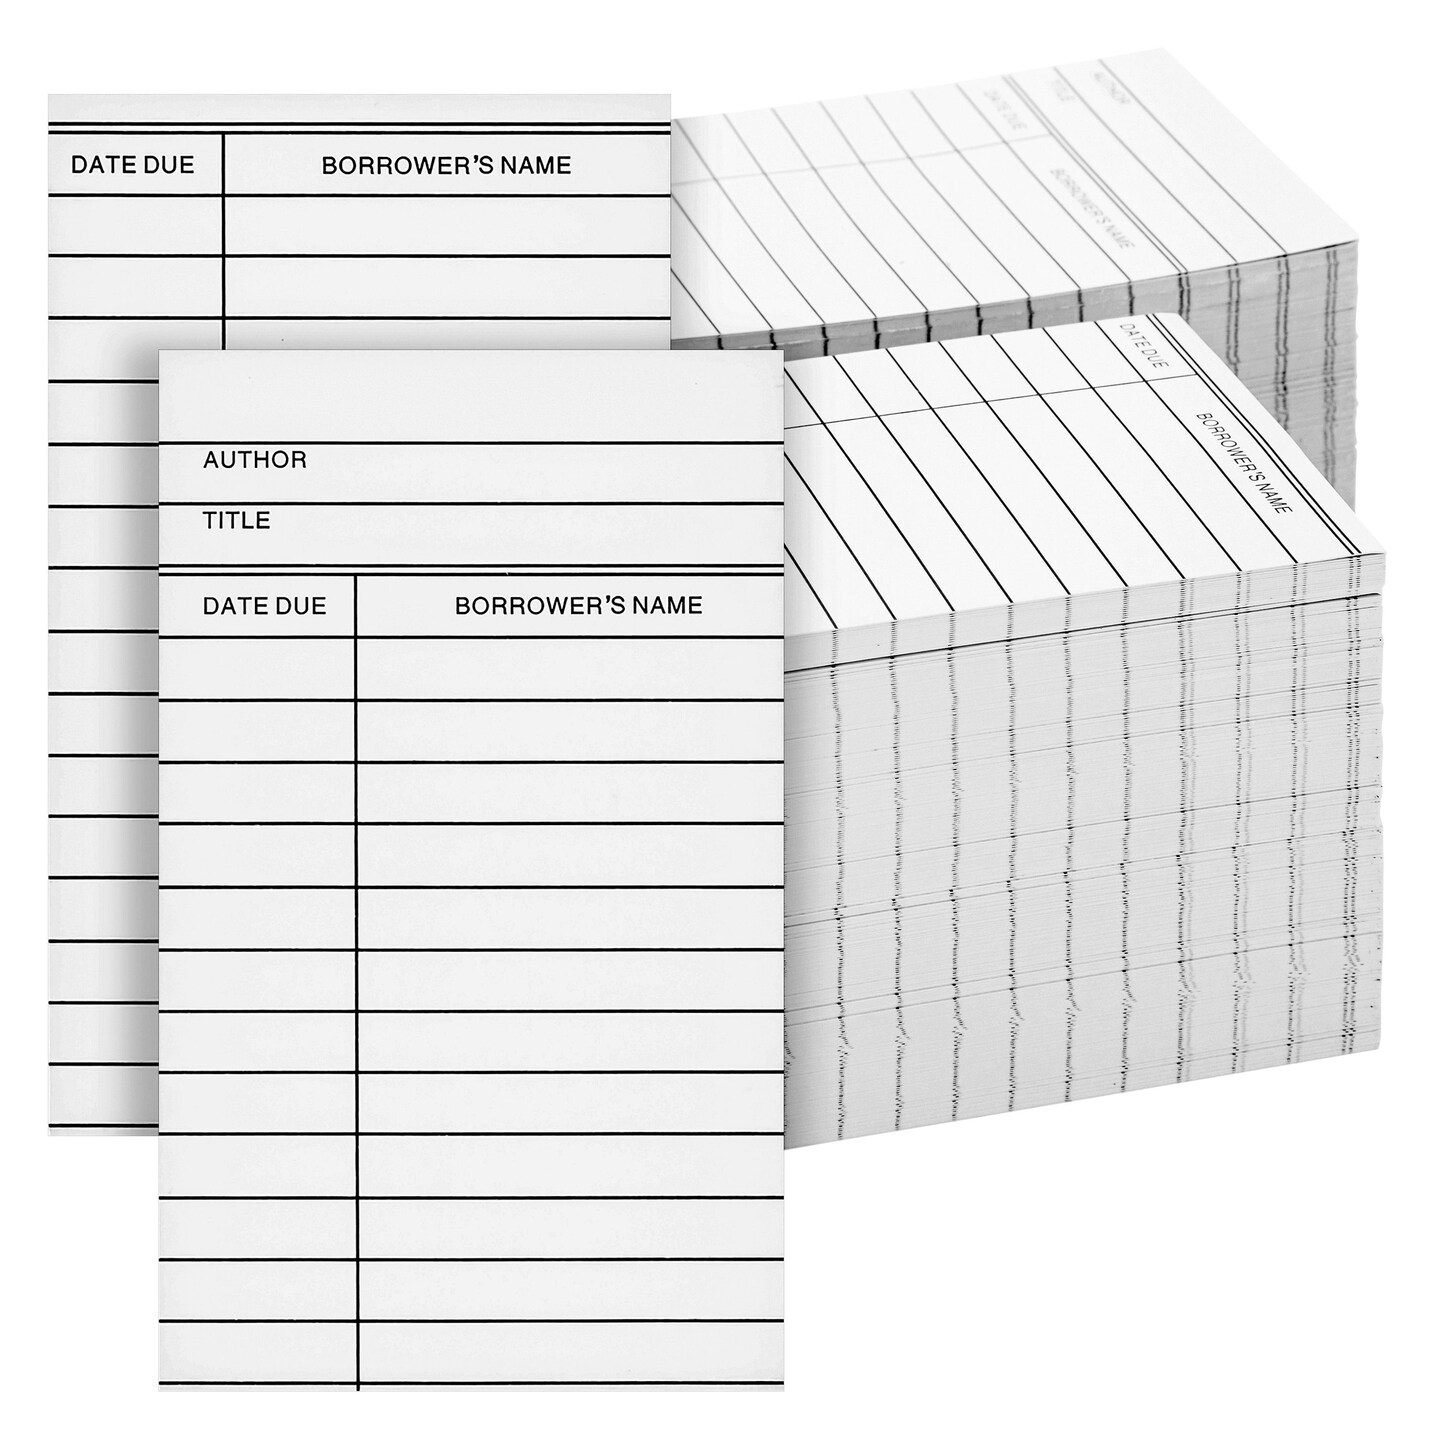 500 Pack Bulk Library Checkout Cards - Vintage-Style Due Date Record Keeping for Book Pockets and Classroom Supplies Cataloging (White, 3x5 Inches)